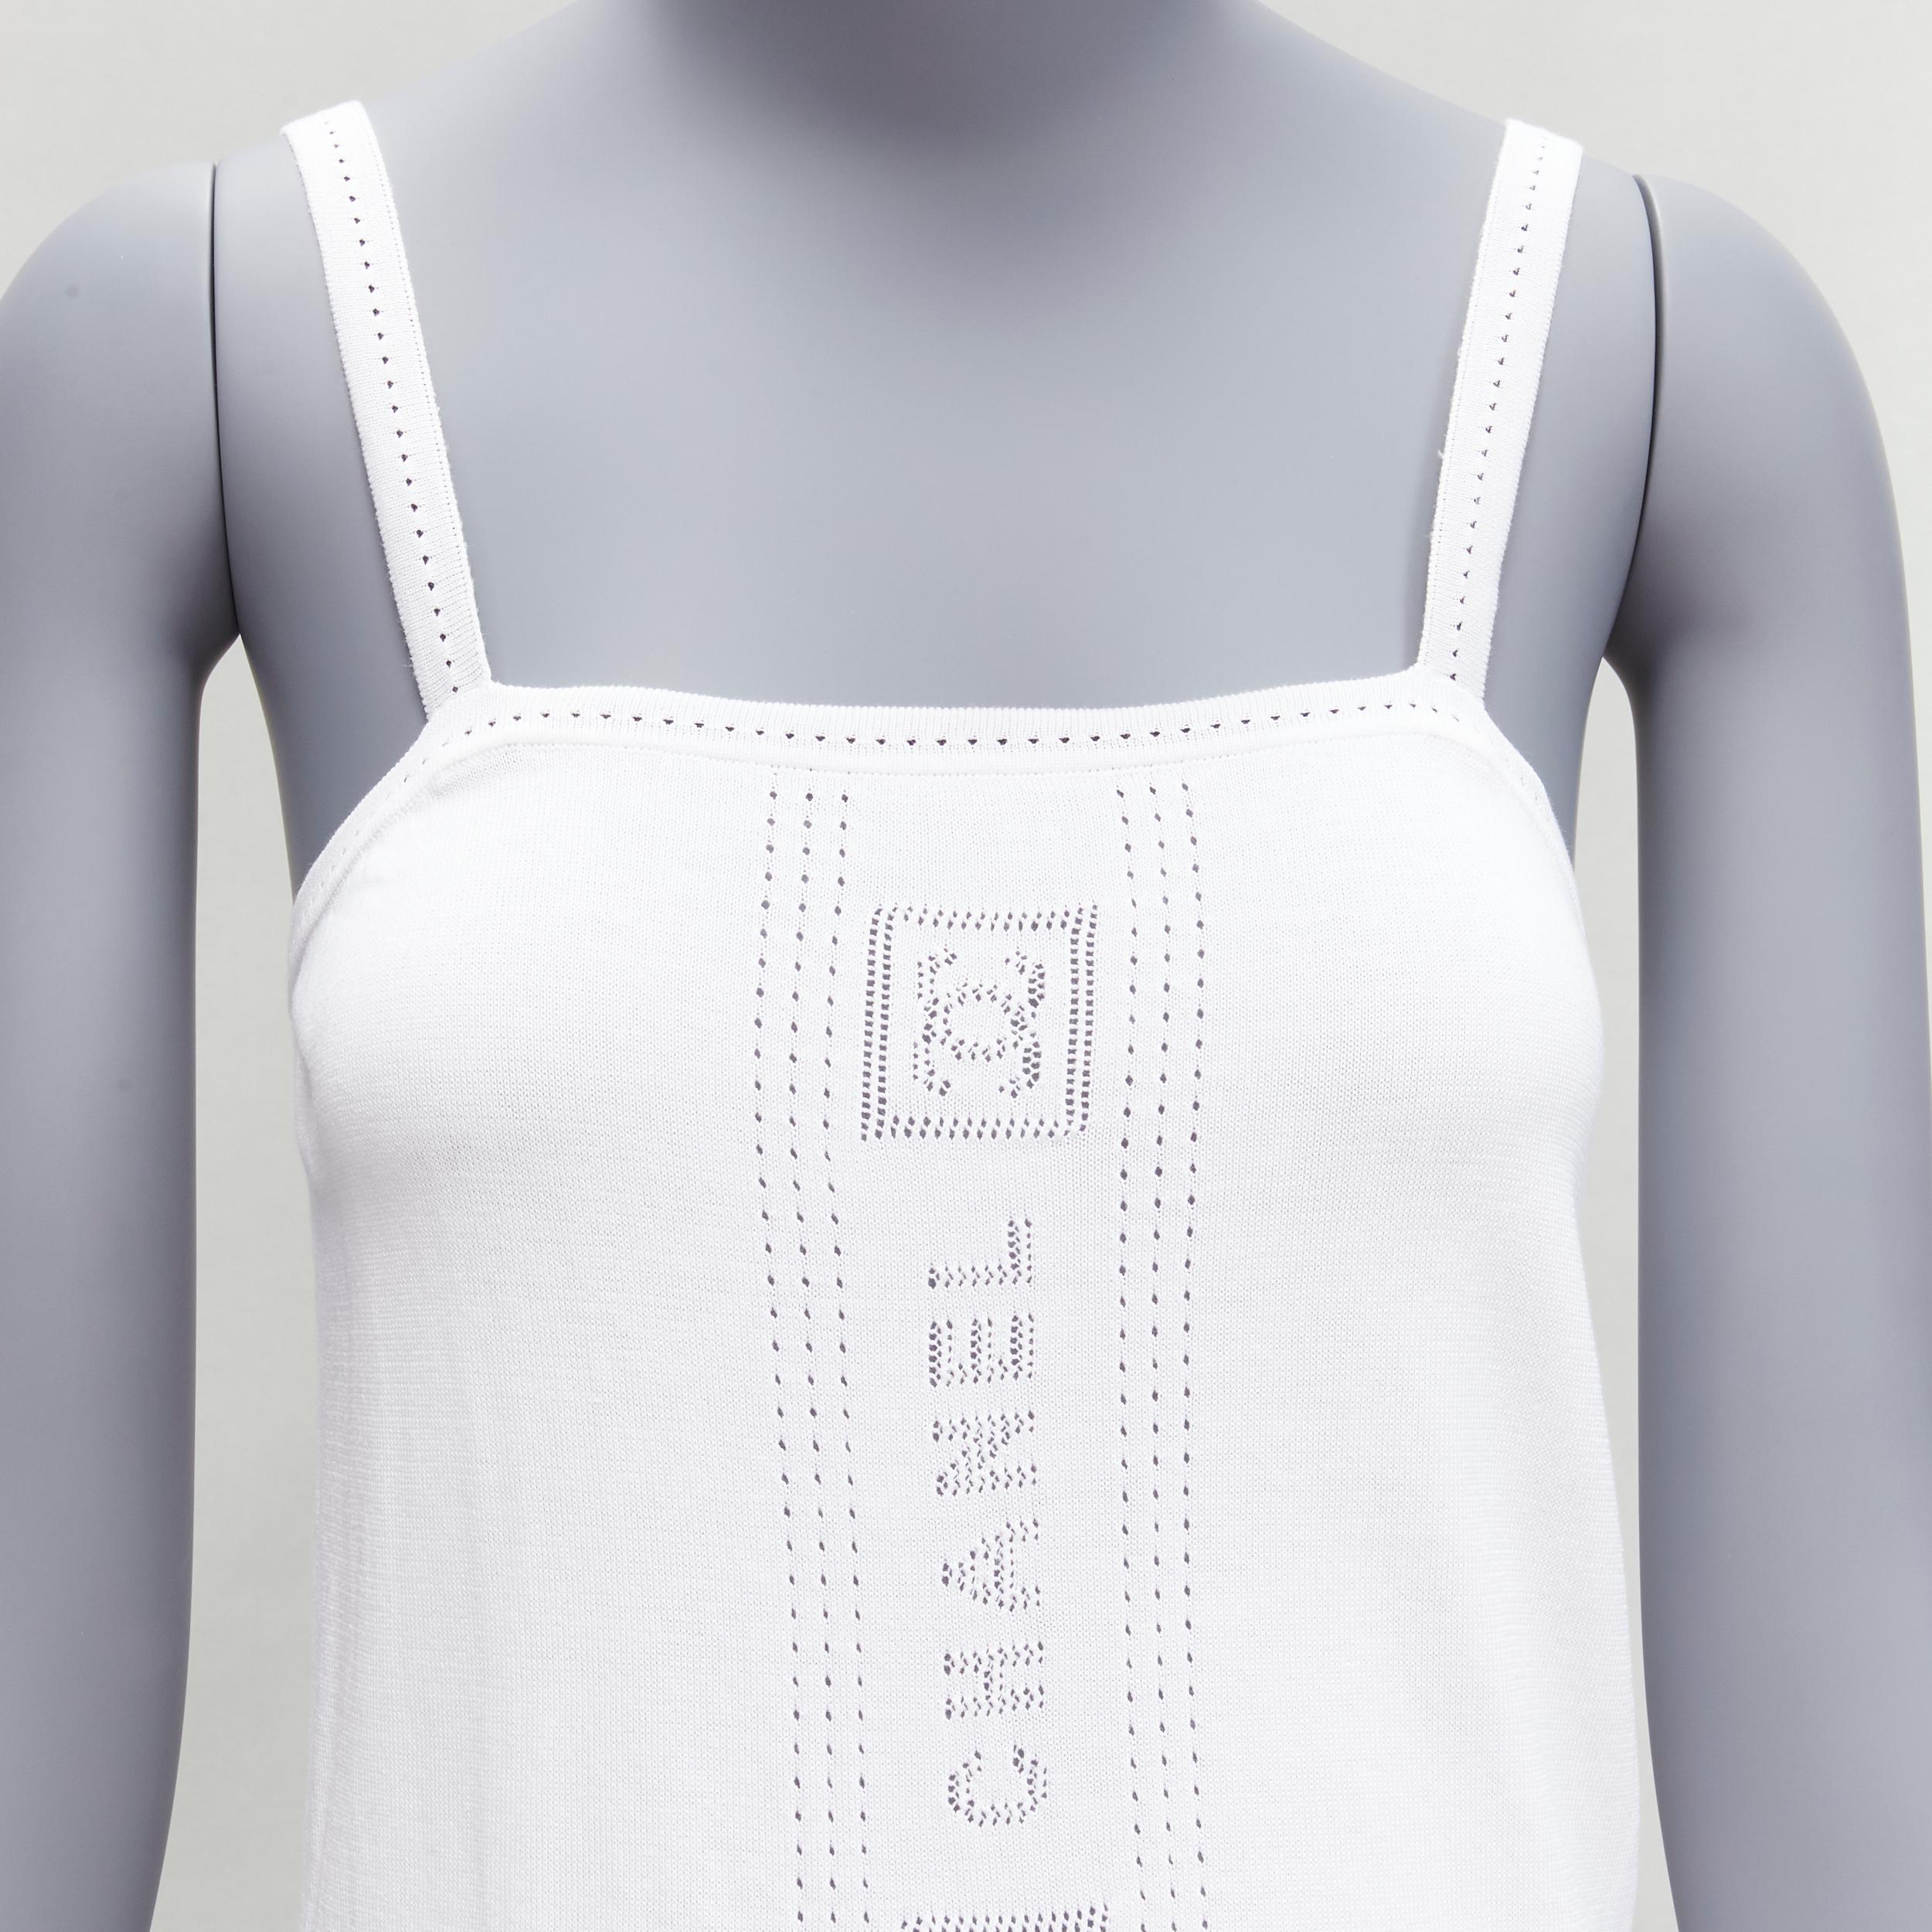 CHANEL SPORT 07C white cotton CC interlock logo knit cami tank top FR36 S
Reference: TGAS/D00114
Brand: Chanel
Designer: Karl Lagerfeld
Collection: Sports Line Cruise 2007
Material: Cotton
Color: White
Pattern: Solid
Closure: Slip On
Made in: